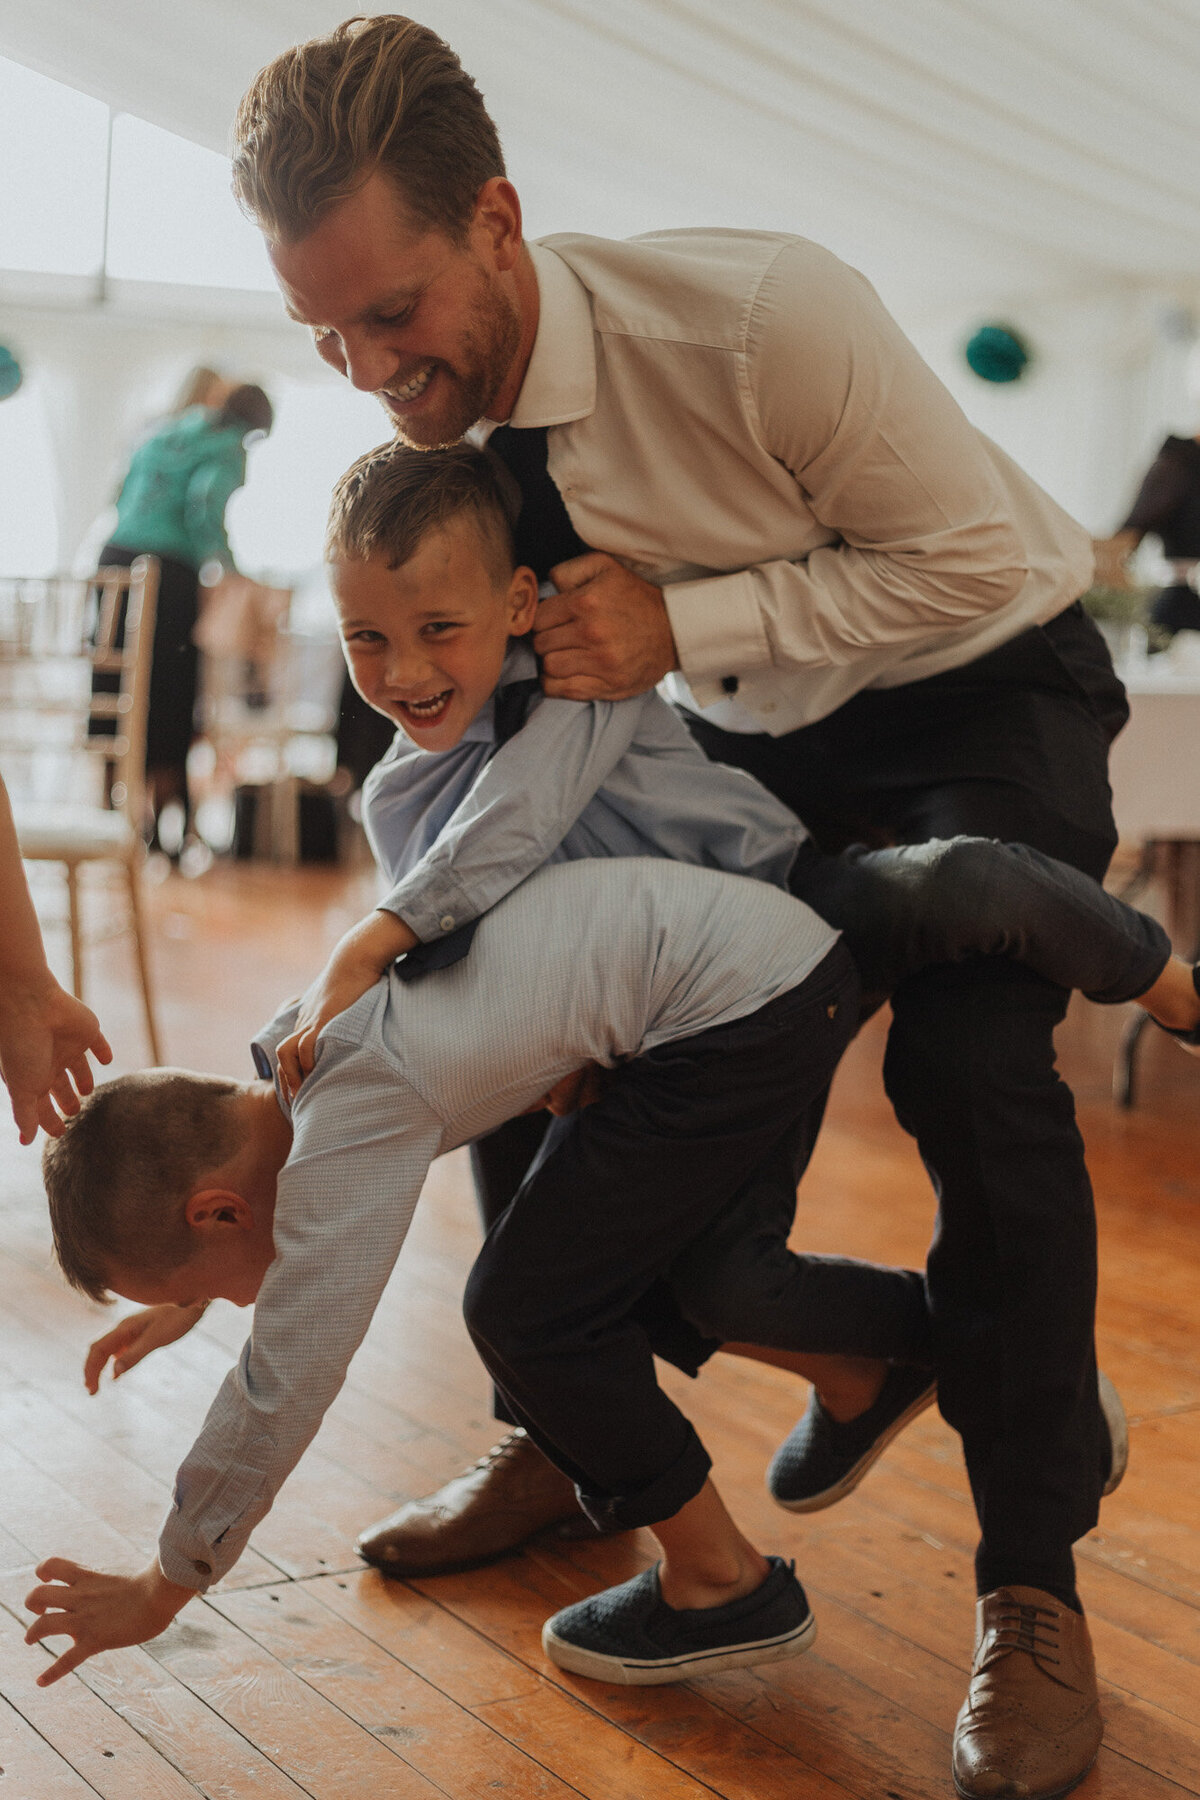 wedding guests playing with kids on the dancefloor